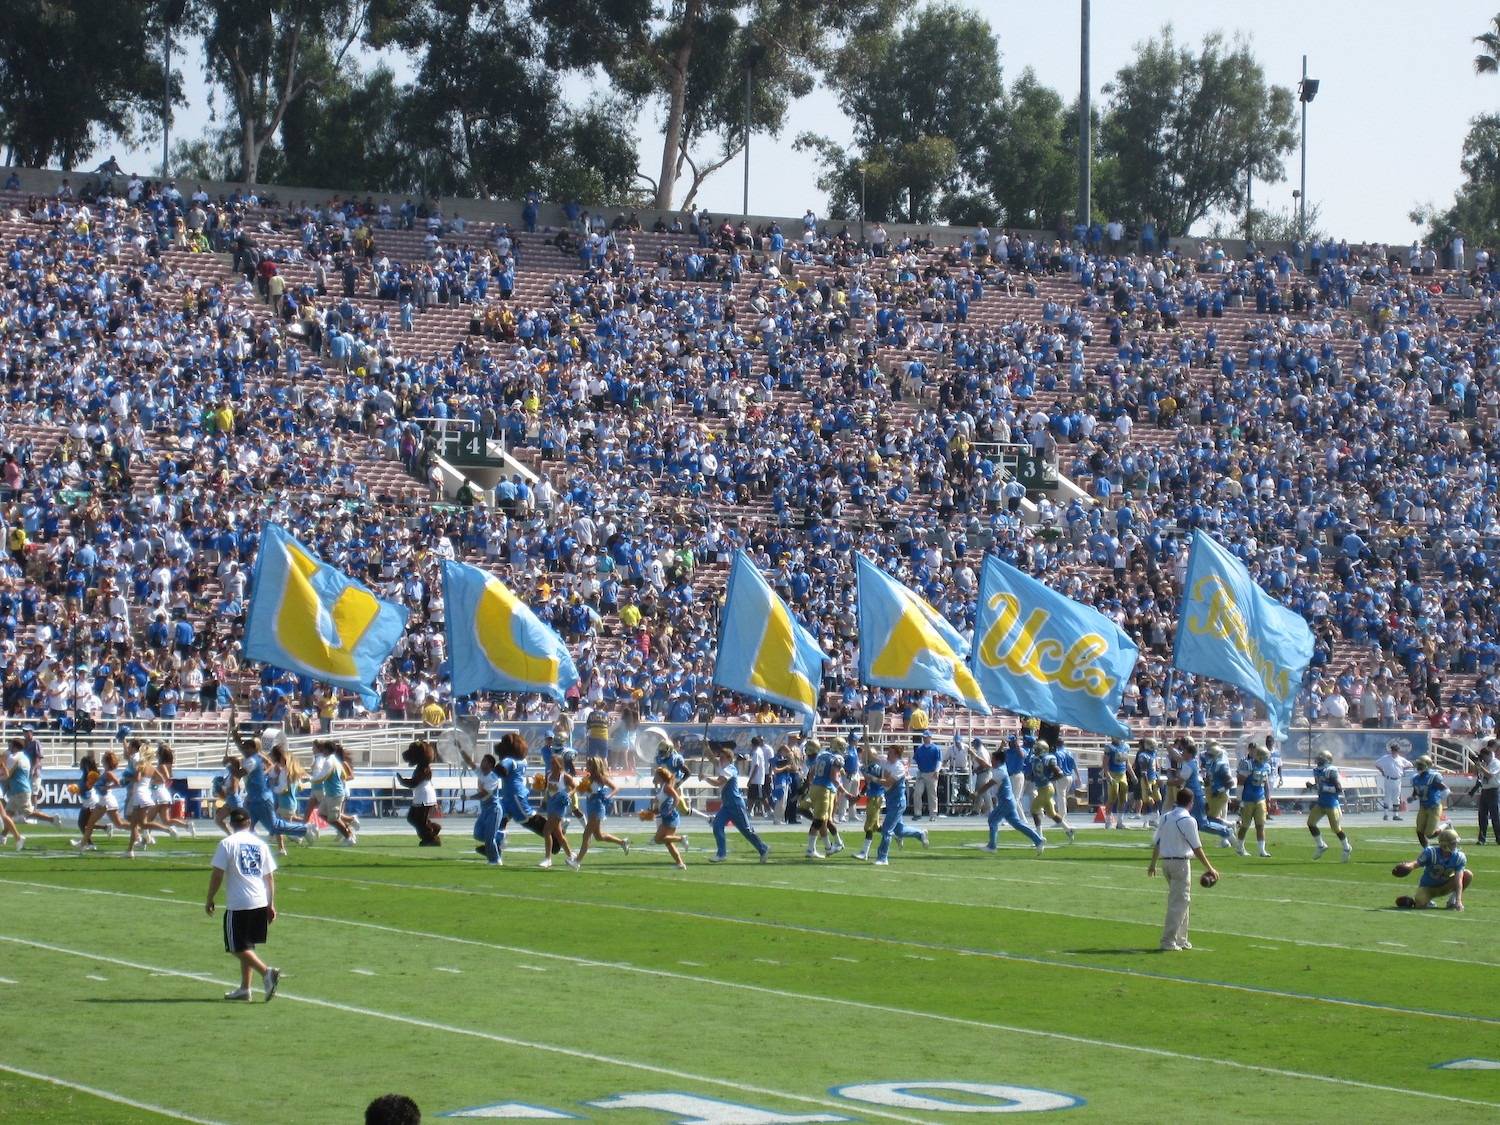 UCLA Bruins Football. Photo Credit: dabruins07 | Under Creative Commons License